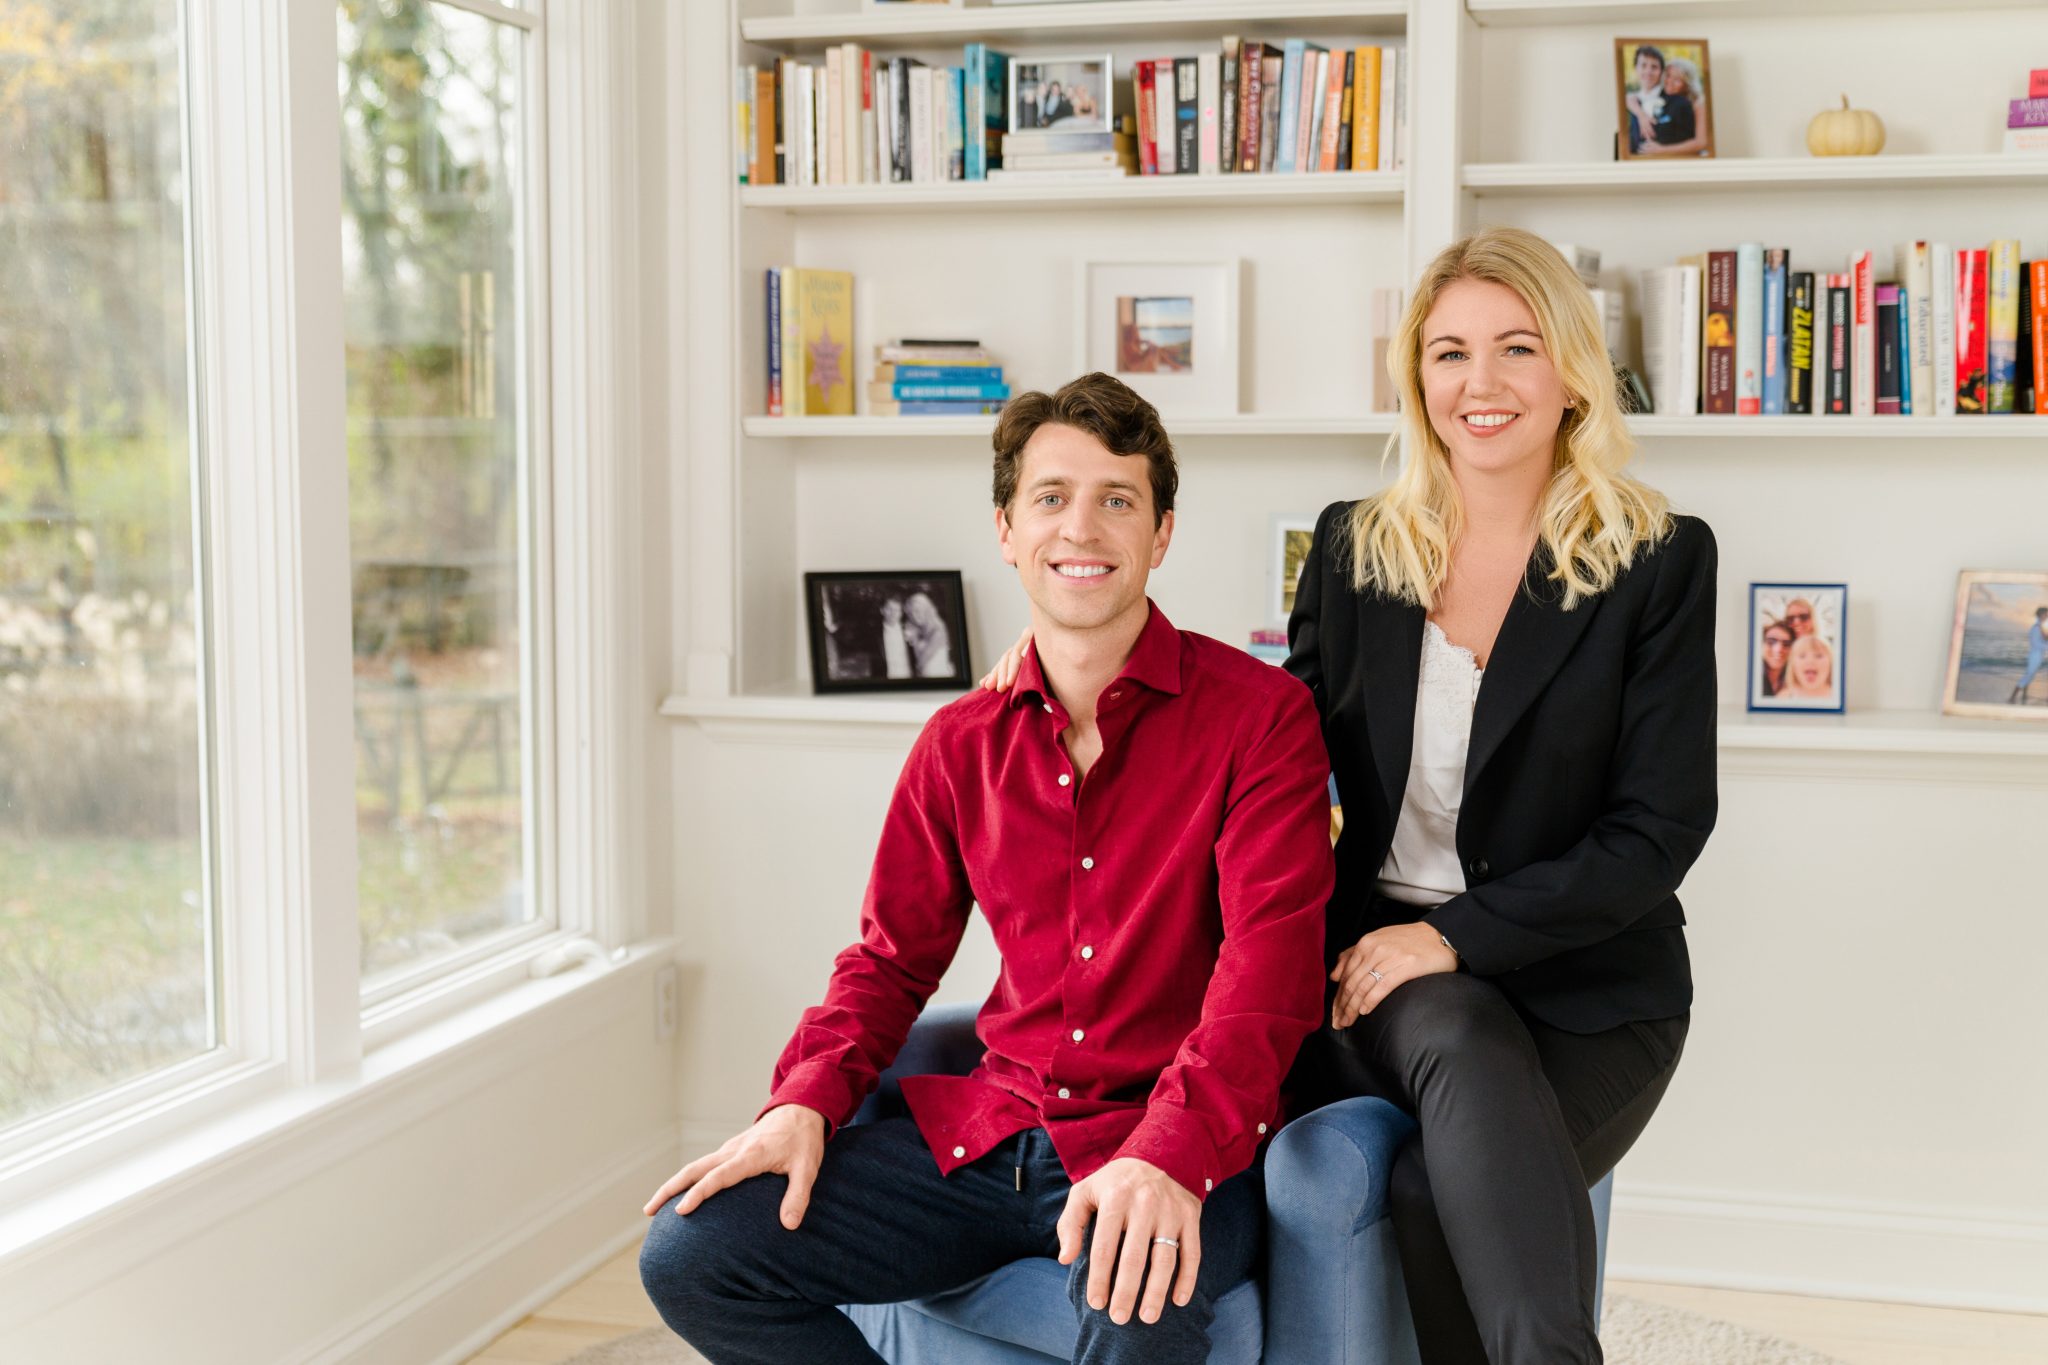 Former CERN particle physicist Dr Elina Berglund Scherwitzl, 38, and her scientist husband, Dr Raoul Scherwitzl, 35, co-CEOs of fertility app Natural Cycles